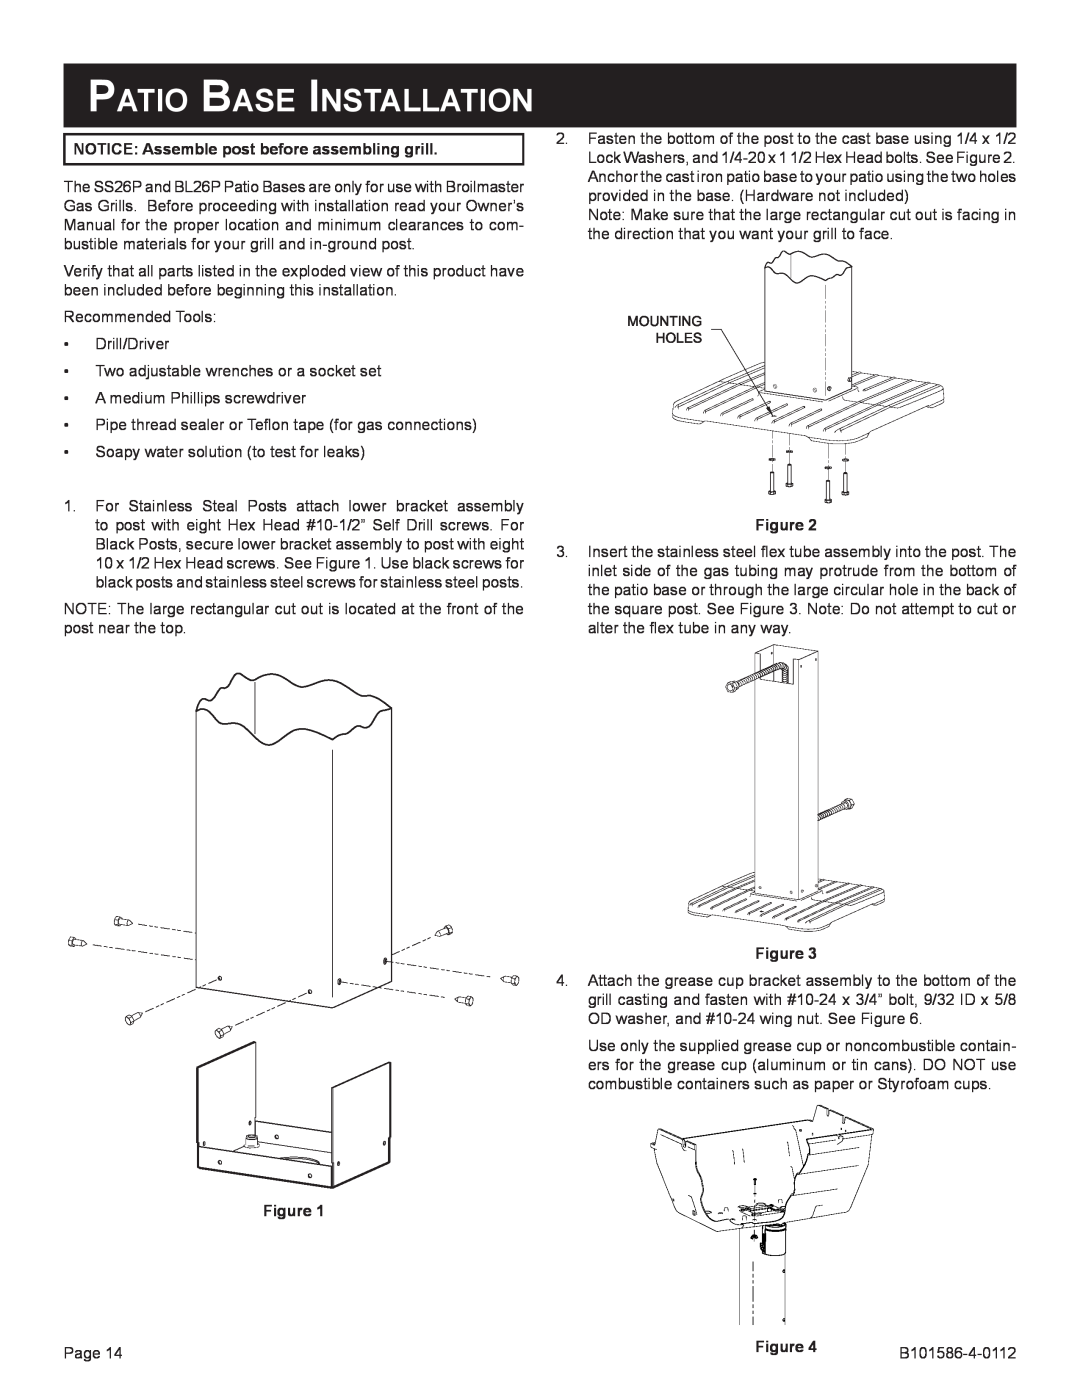 Broilmaster B101652, DCB1-2, SS26P-1, SS48G-1, PCB1-2 Patio Base Installation, NOTICE Assemble post before assembling grill 